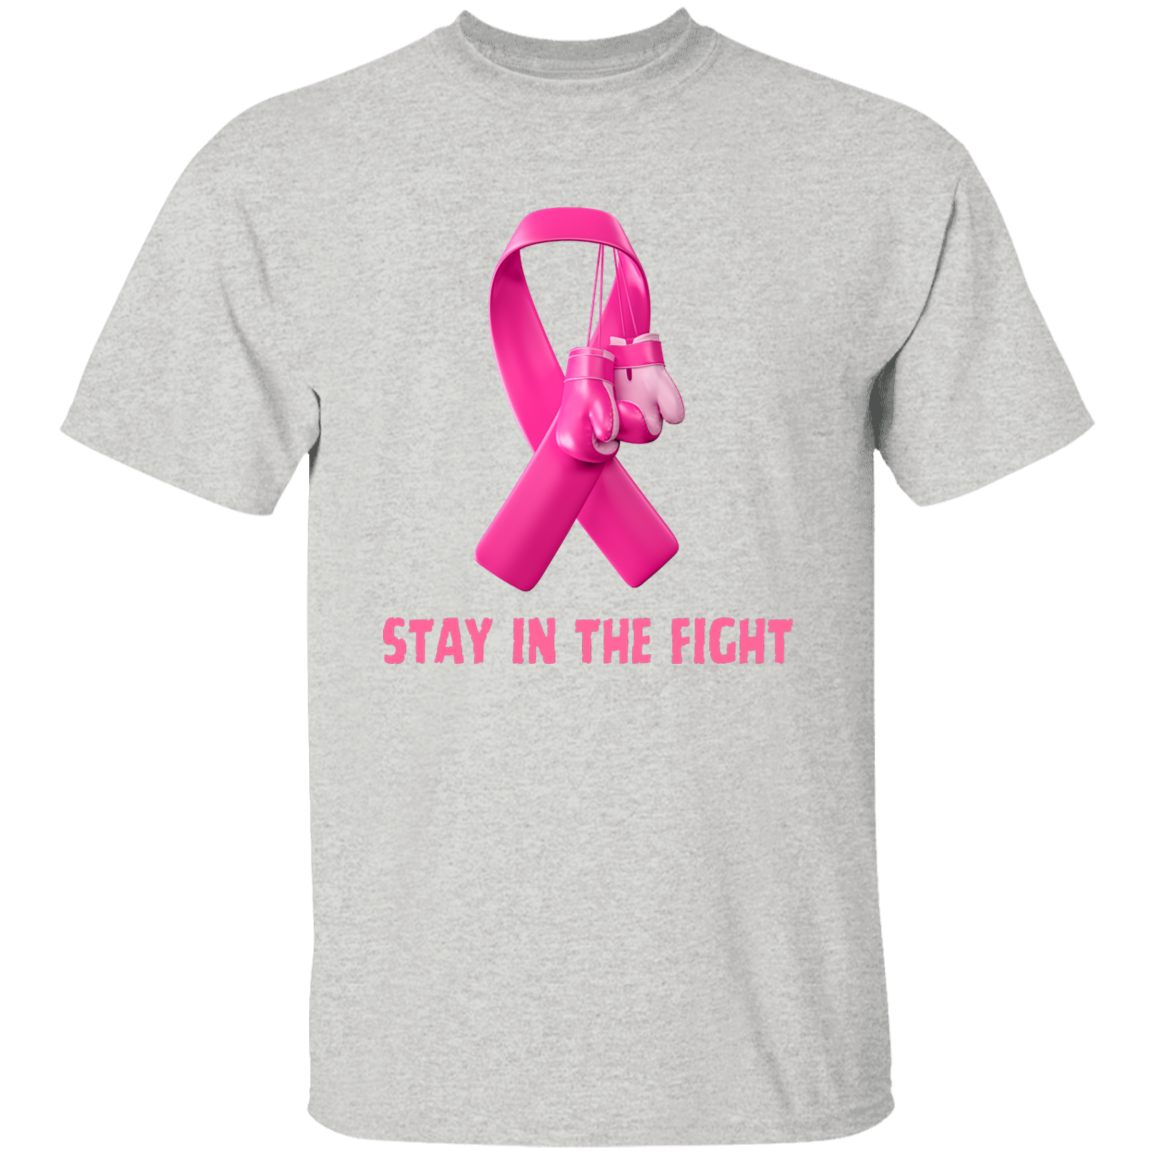 Stay in the Fight Short Sleeve Shirt